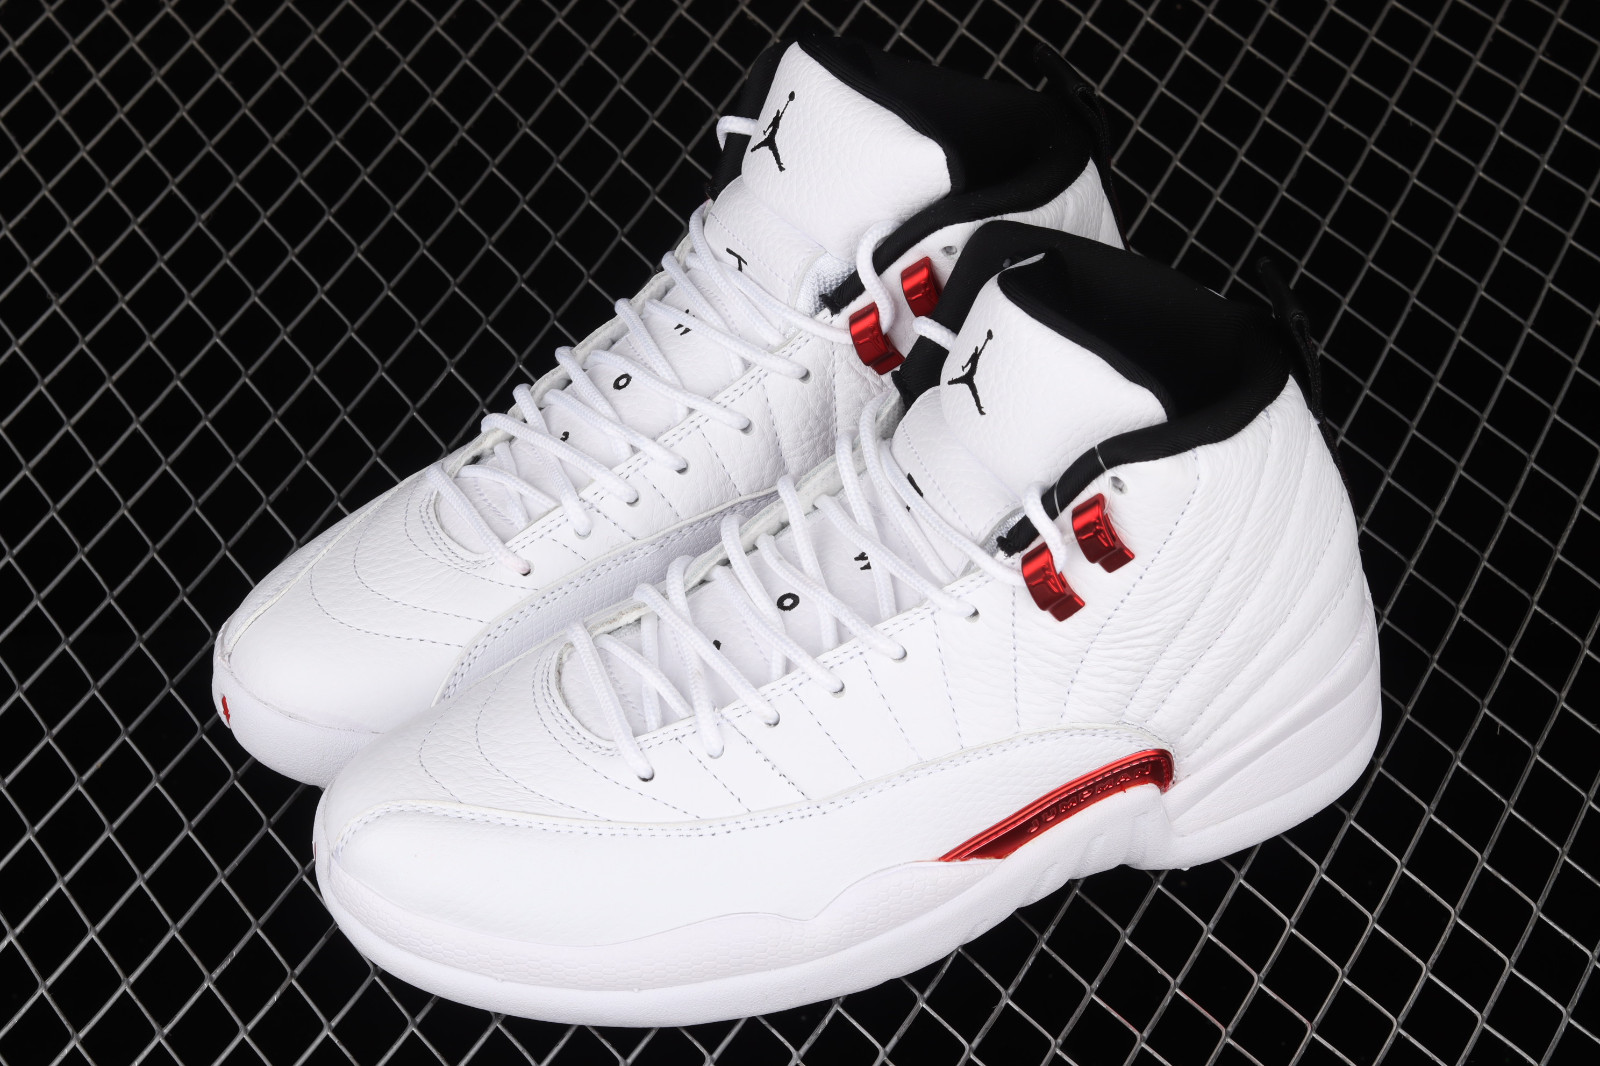 An Overview of the Red Black Jordan 12 Sneakers